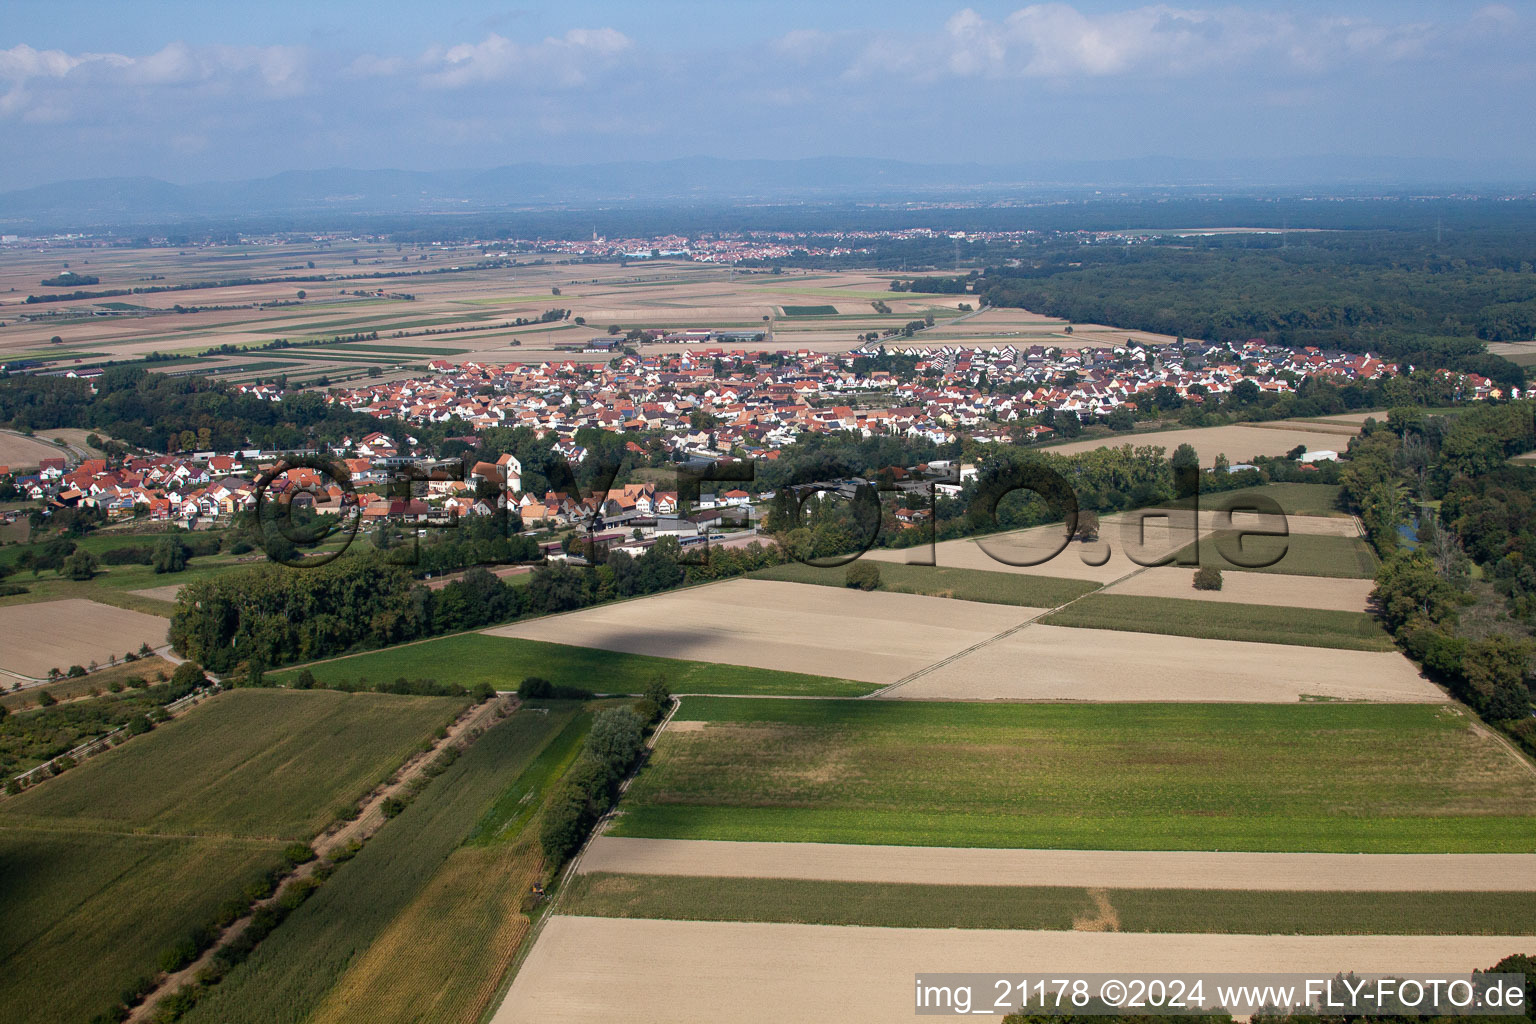 Aerial photograpy of Village - view on the edge of agricultural fields and farmland in Hoerdt in the state Rhineland-Palatinate